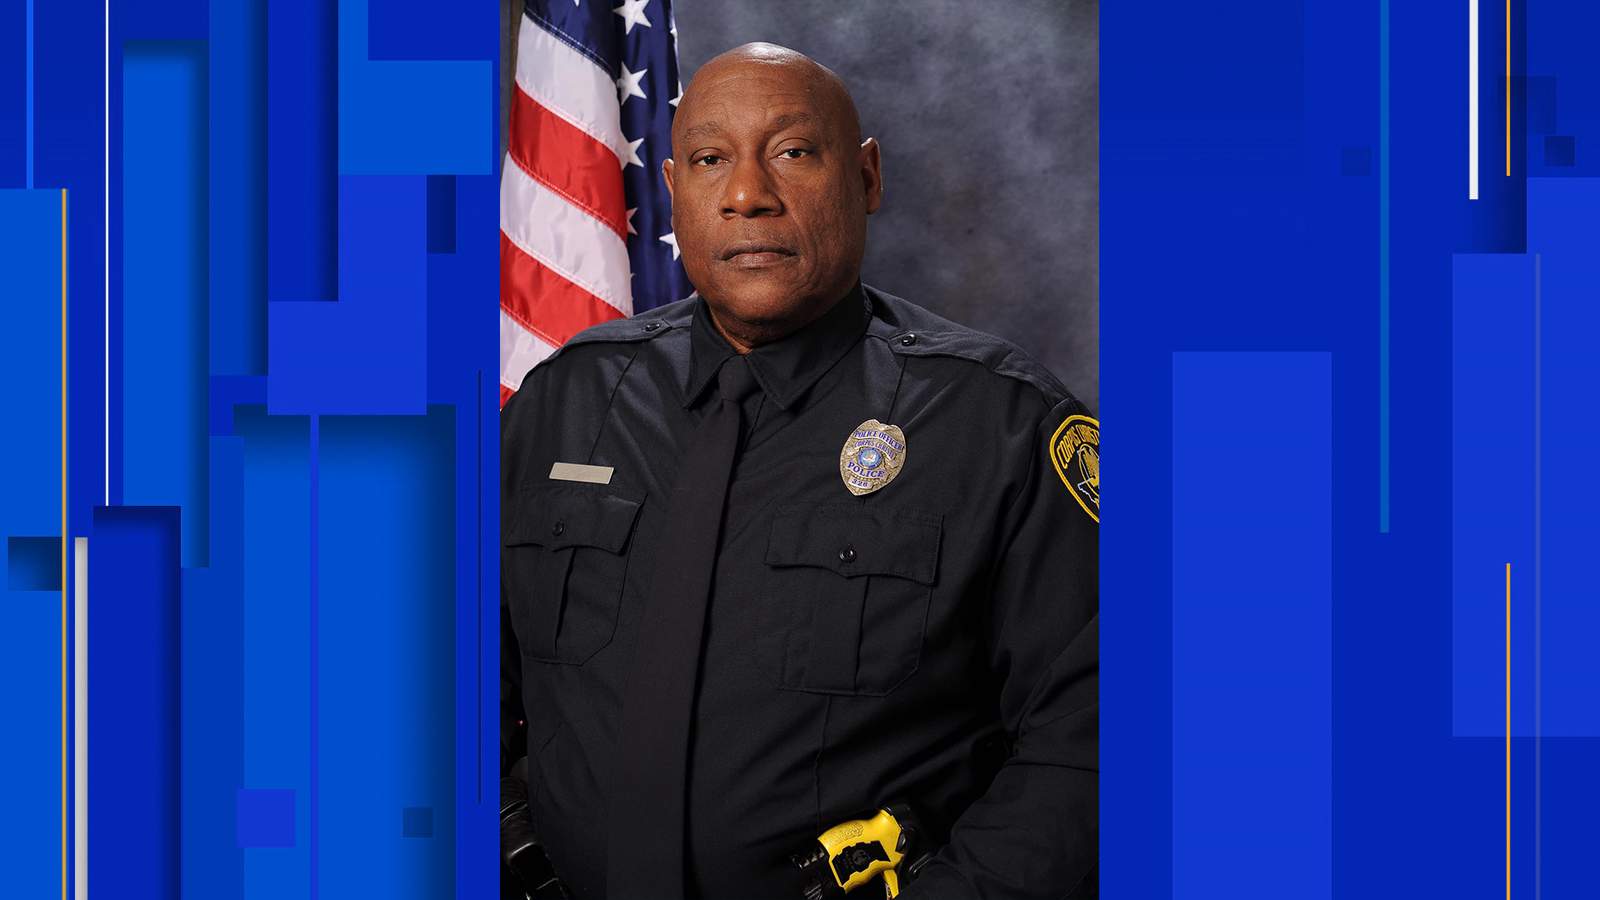 Corpus Christi senior police officer dies from COVID-19 complications